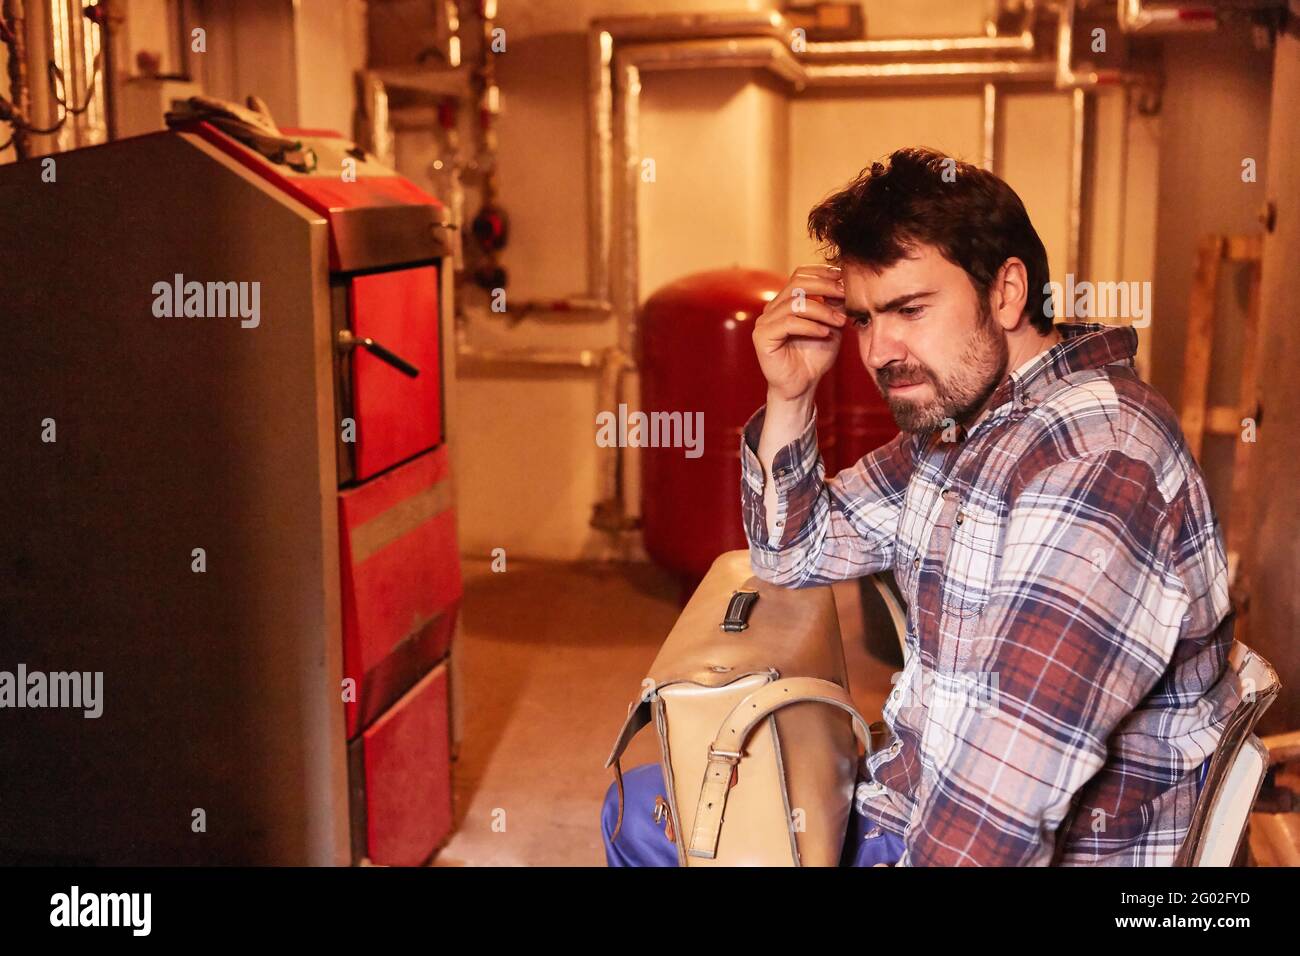 Thoughtful man as a do-it-yourselfer has a problem with the defective heating system Stock Photo